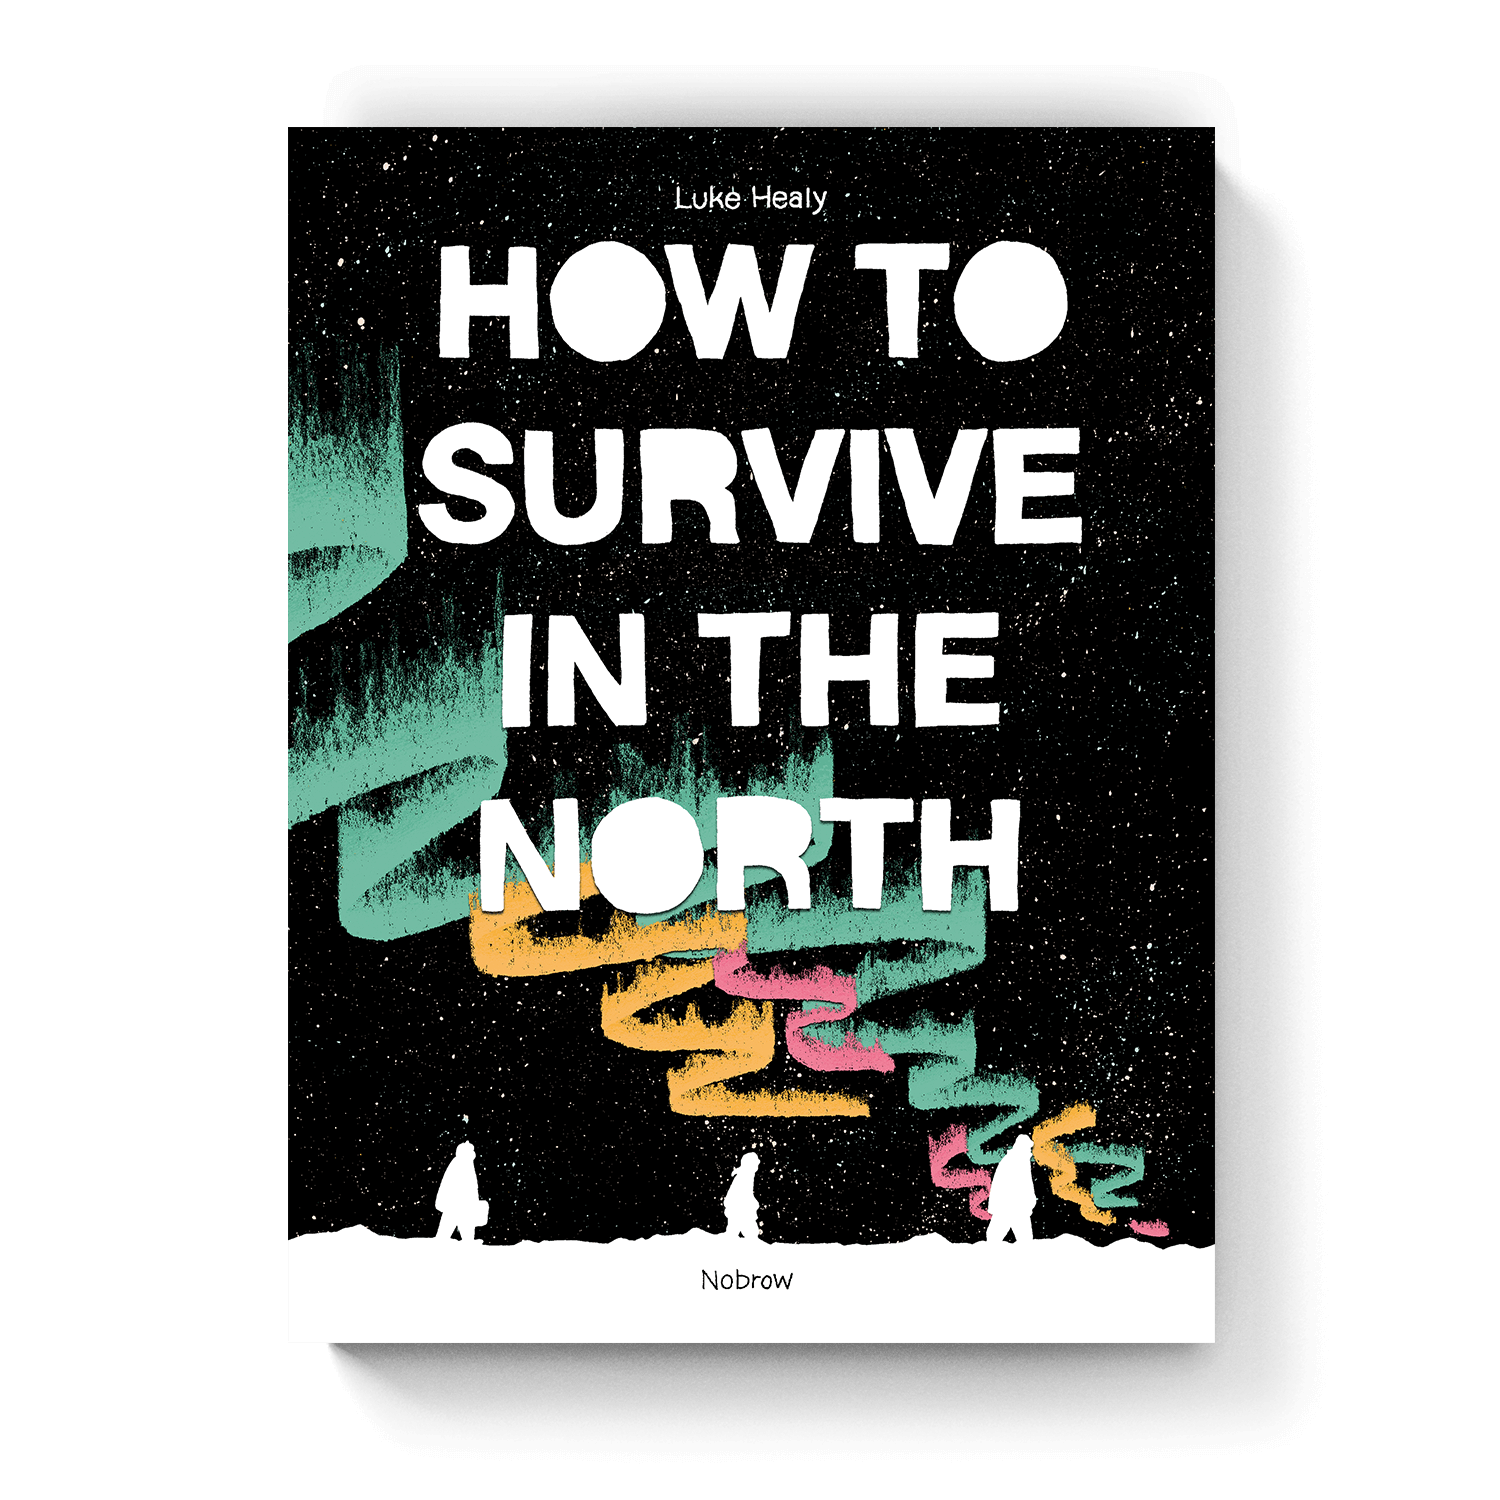 How to Survive in the North